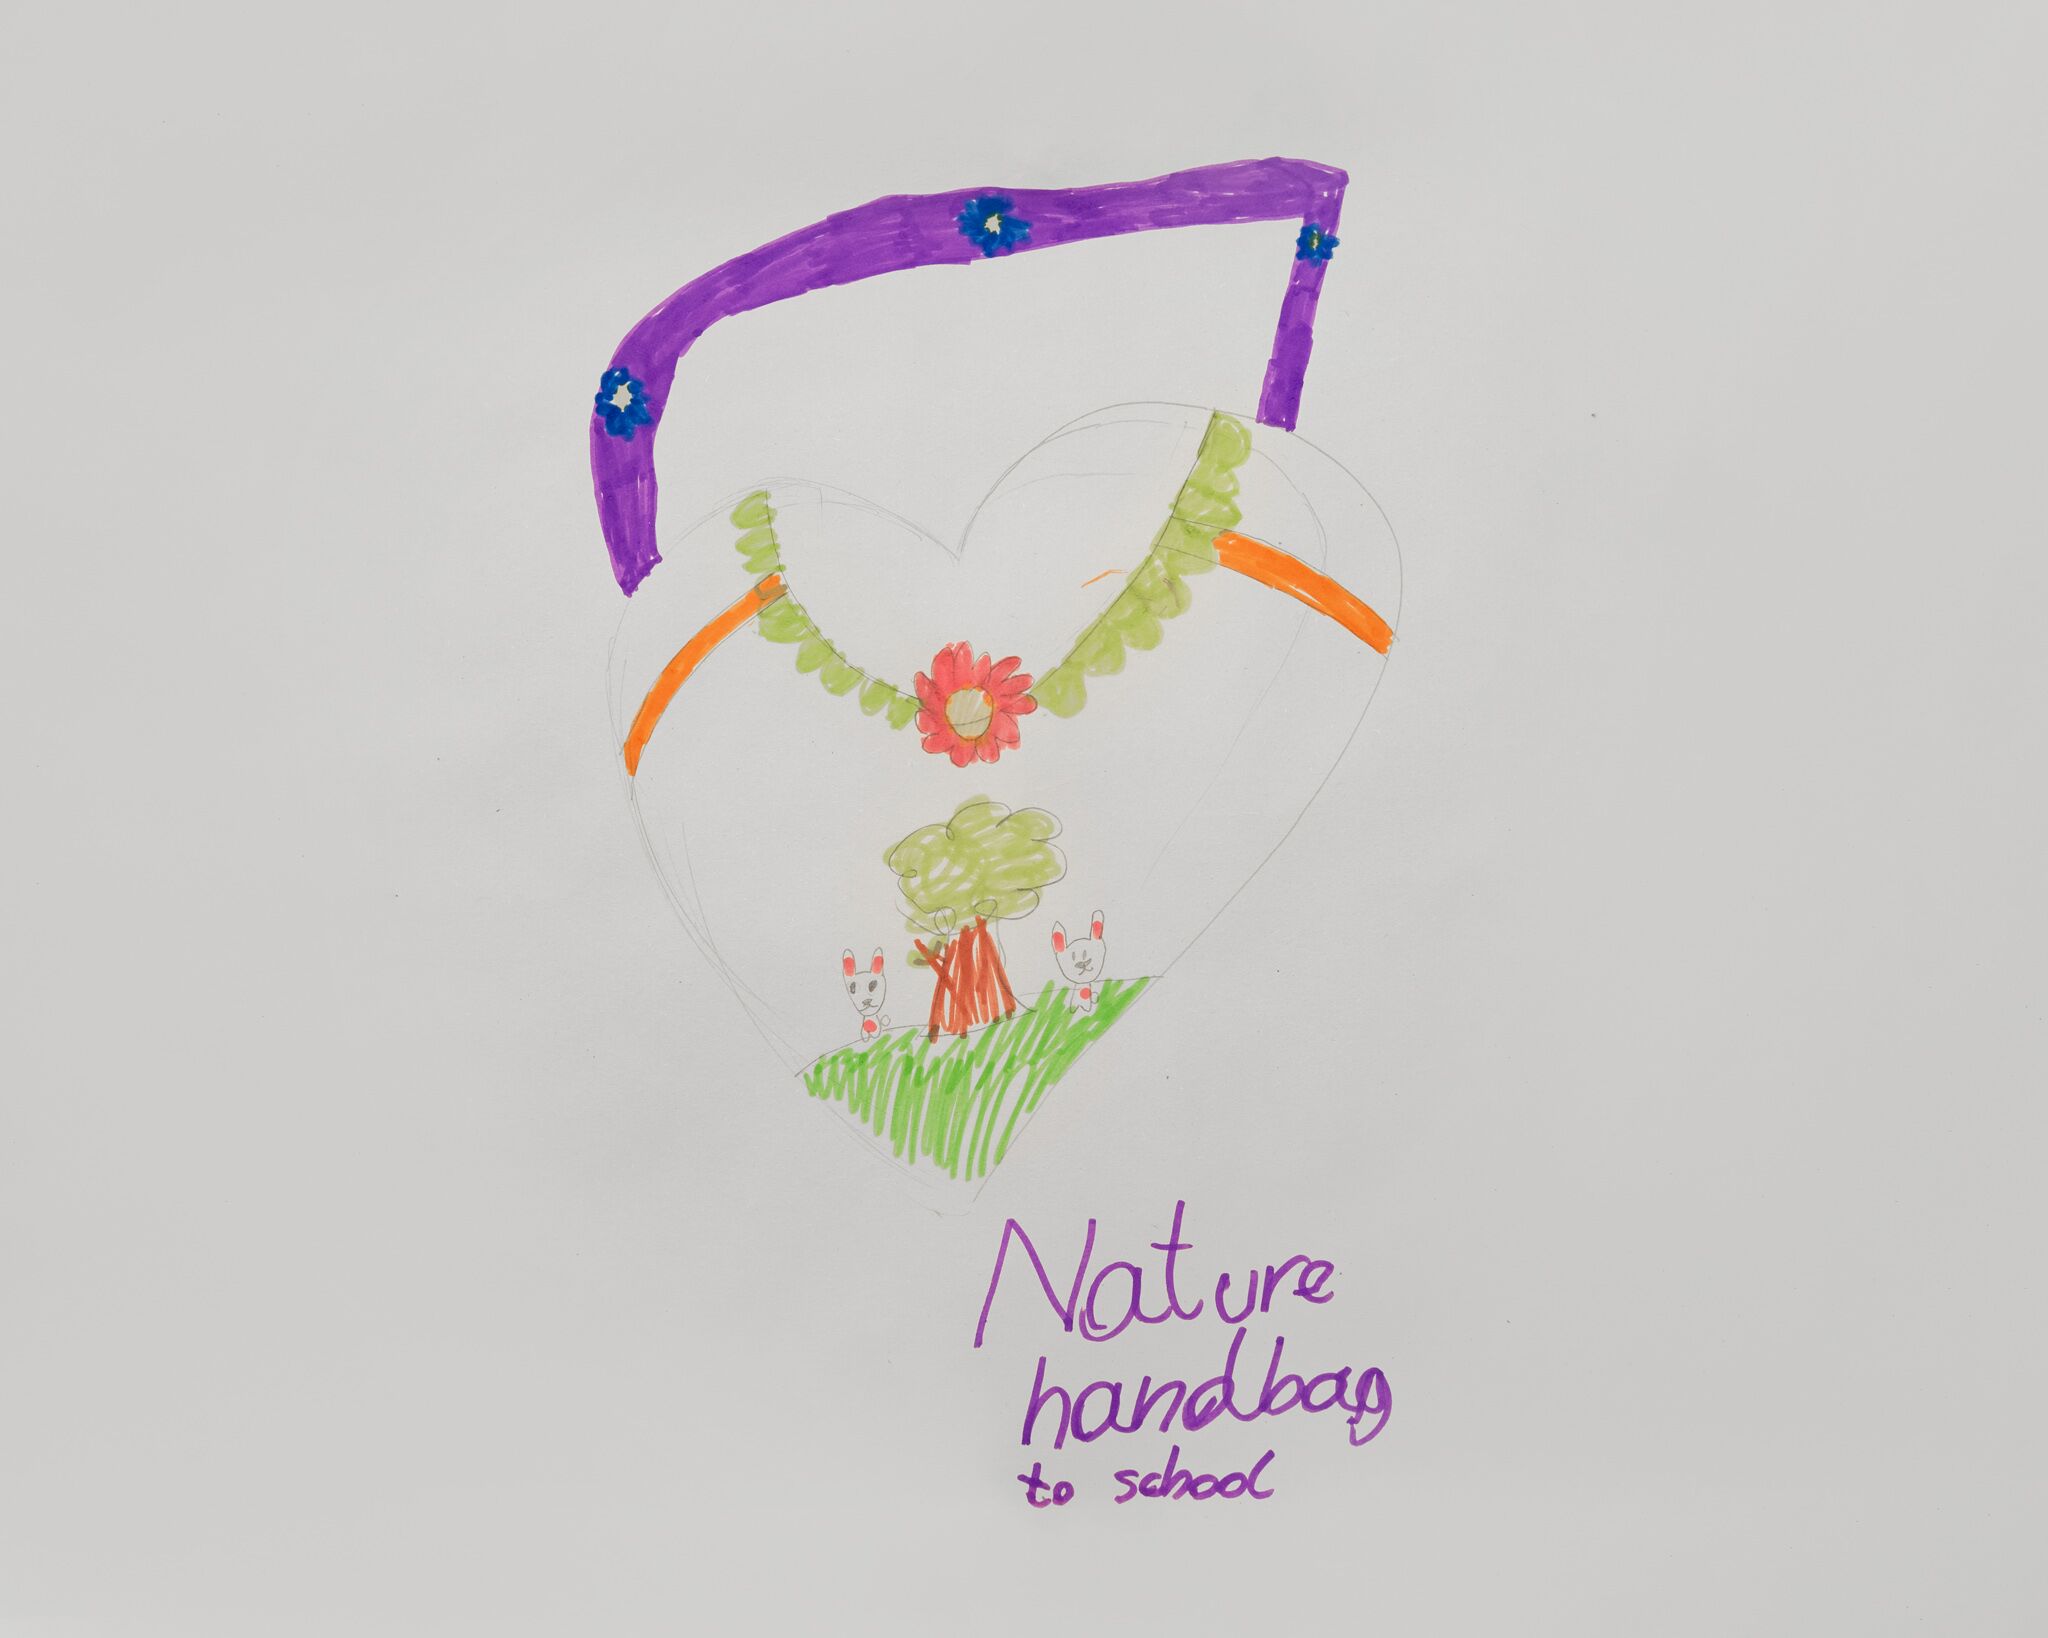 Inspired by nature bag includes seeds to grow wildflowers and attract bees.